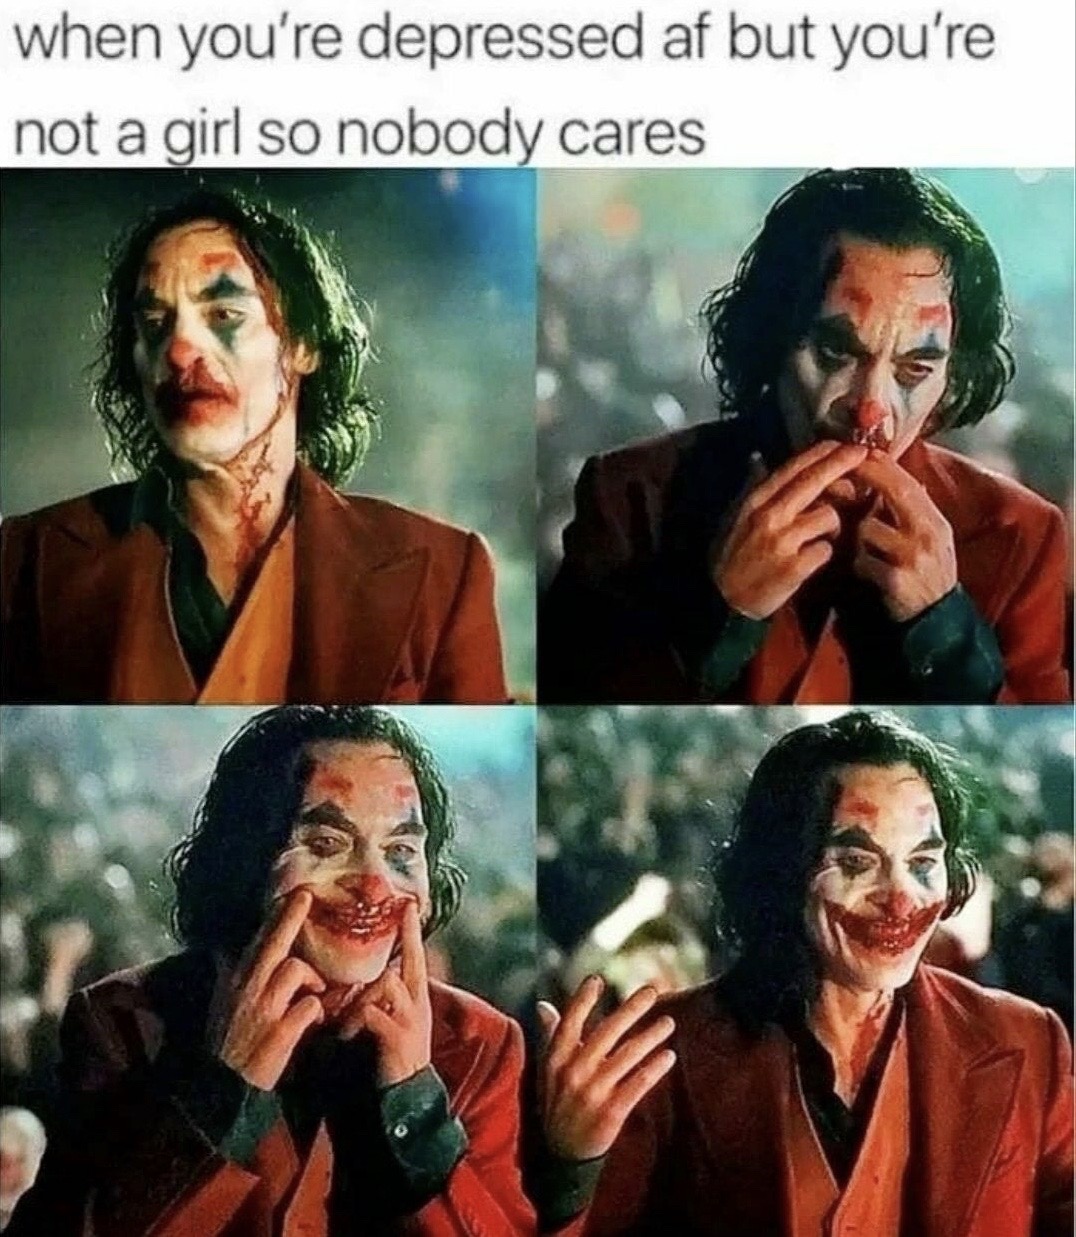 joker smile through the pain - when you're depressed af but you're not a girl so nobody cares